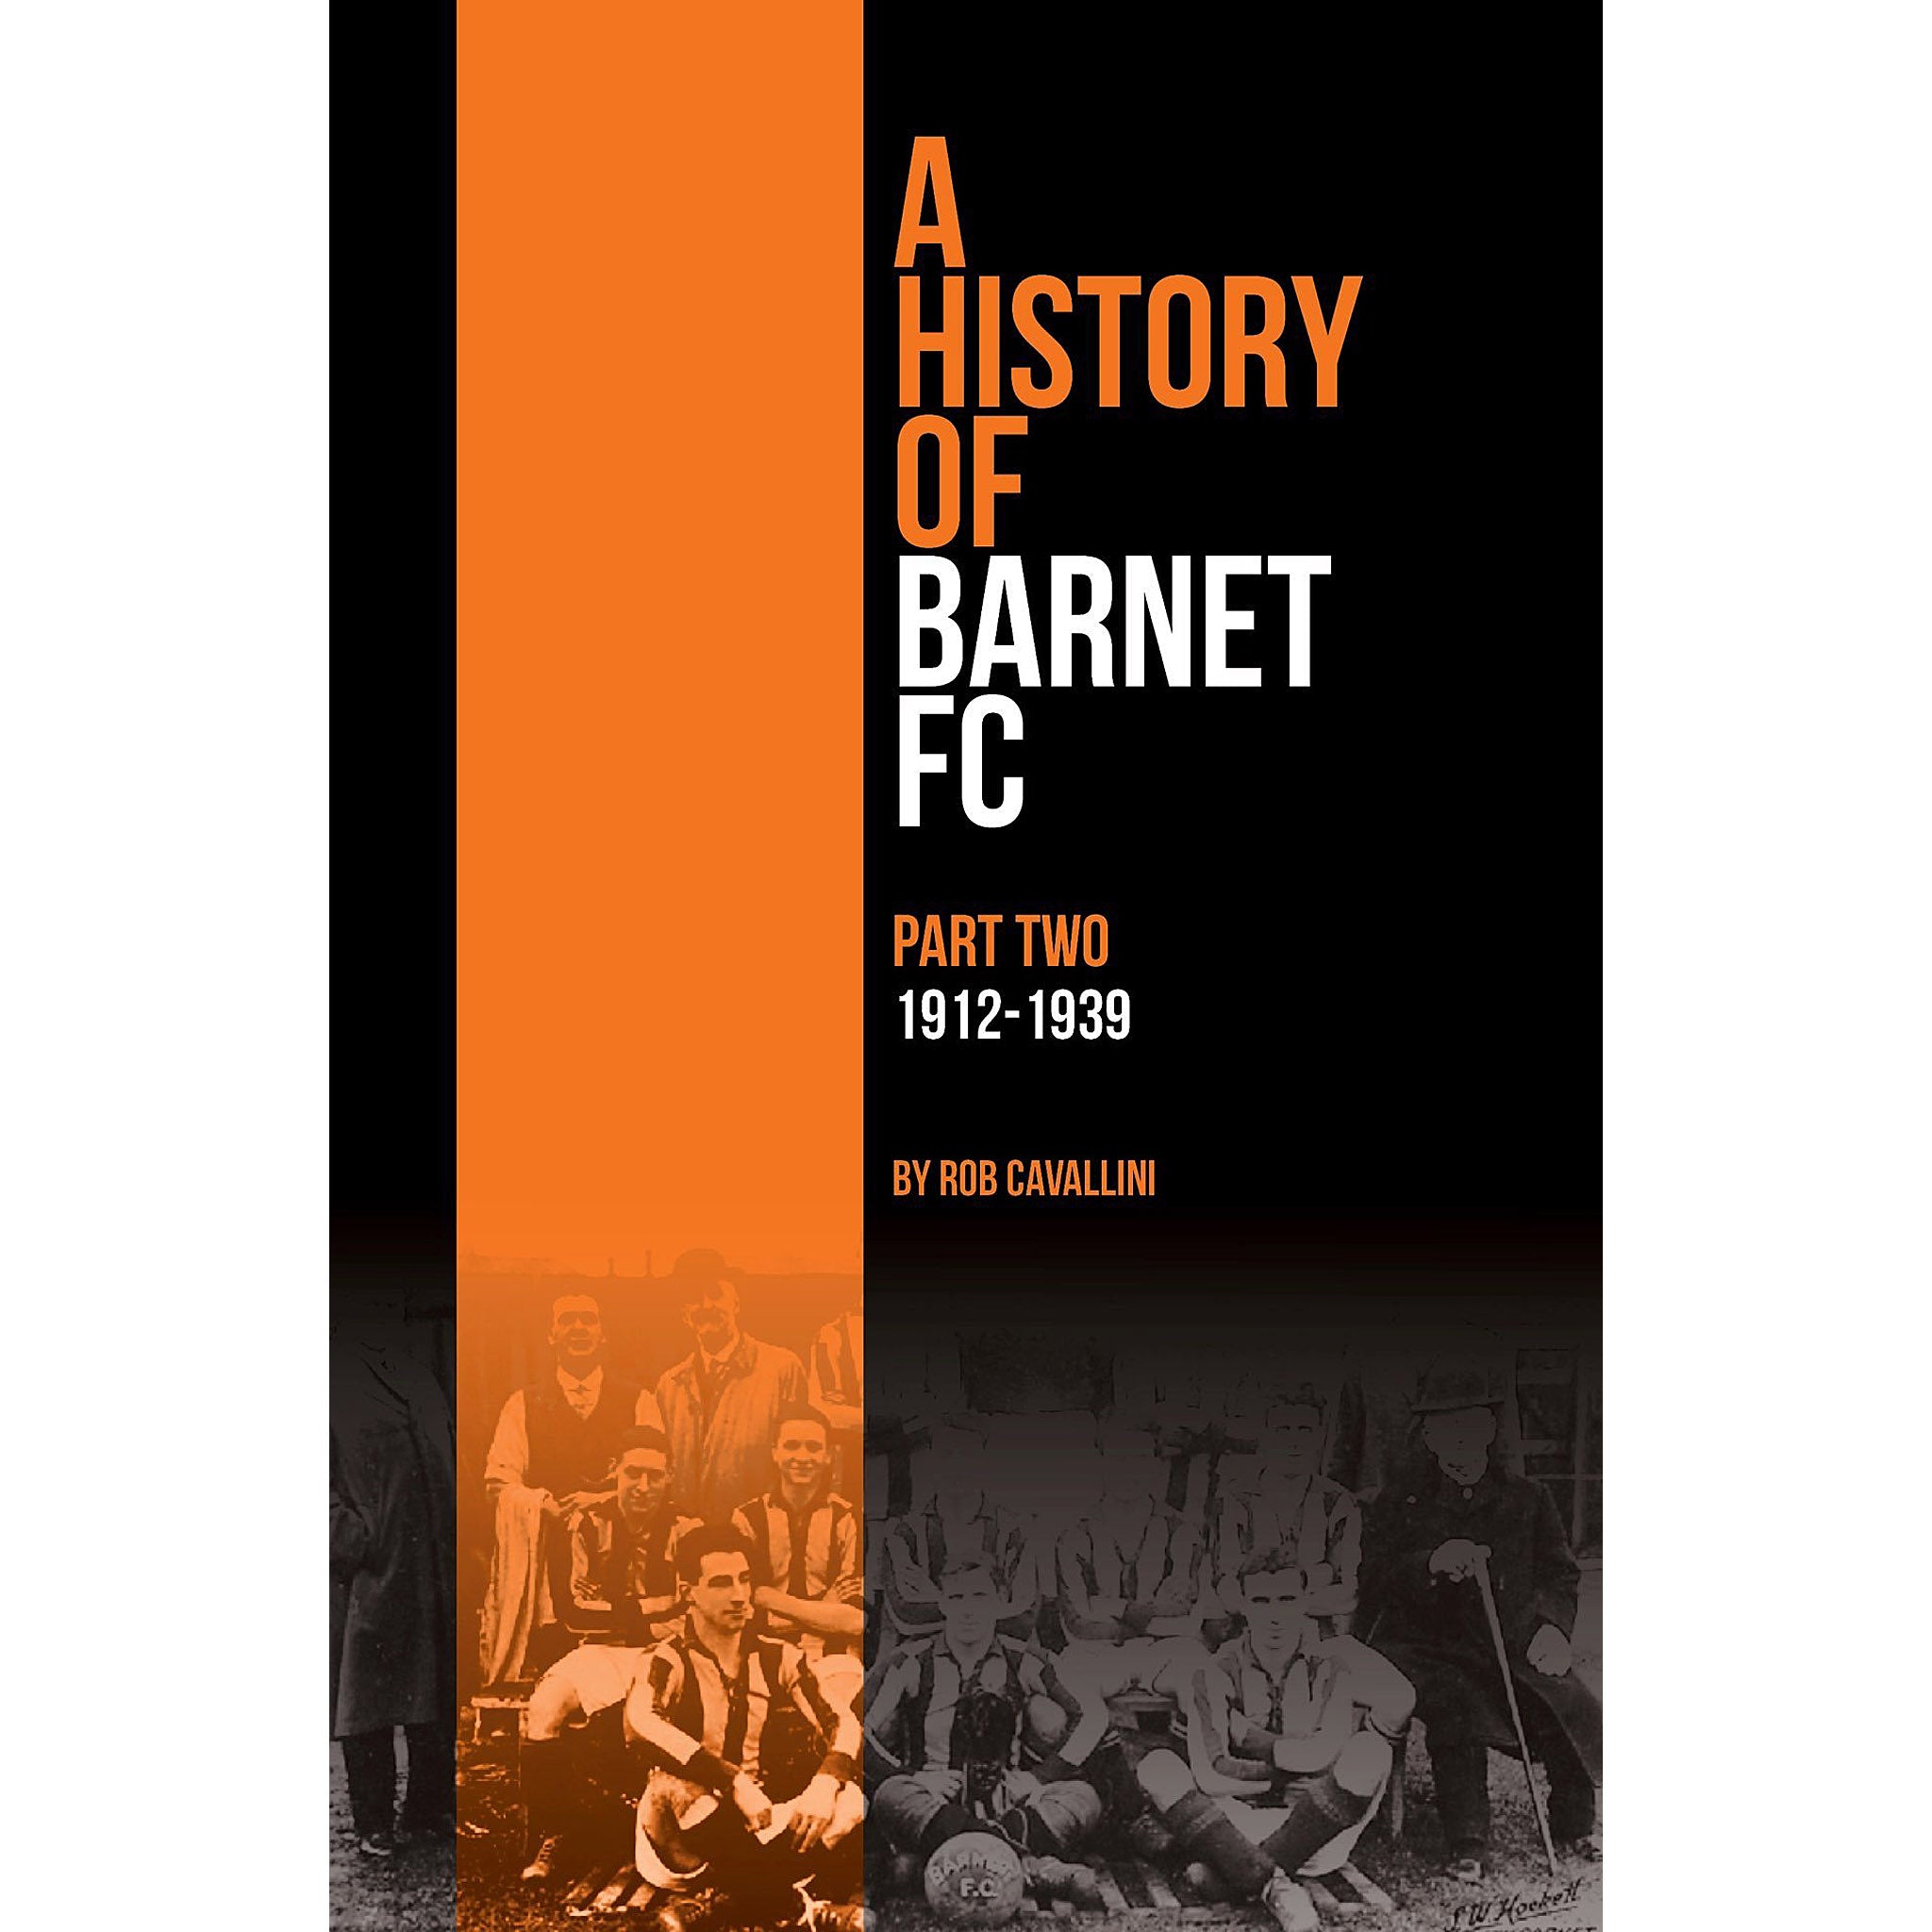 A History of Barnet FC – Part Two – 1912-1939